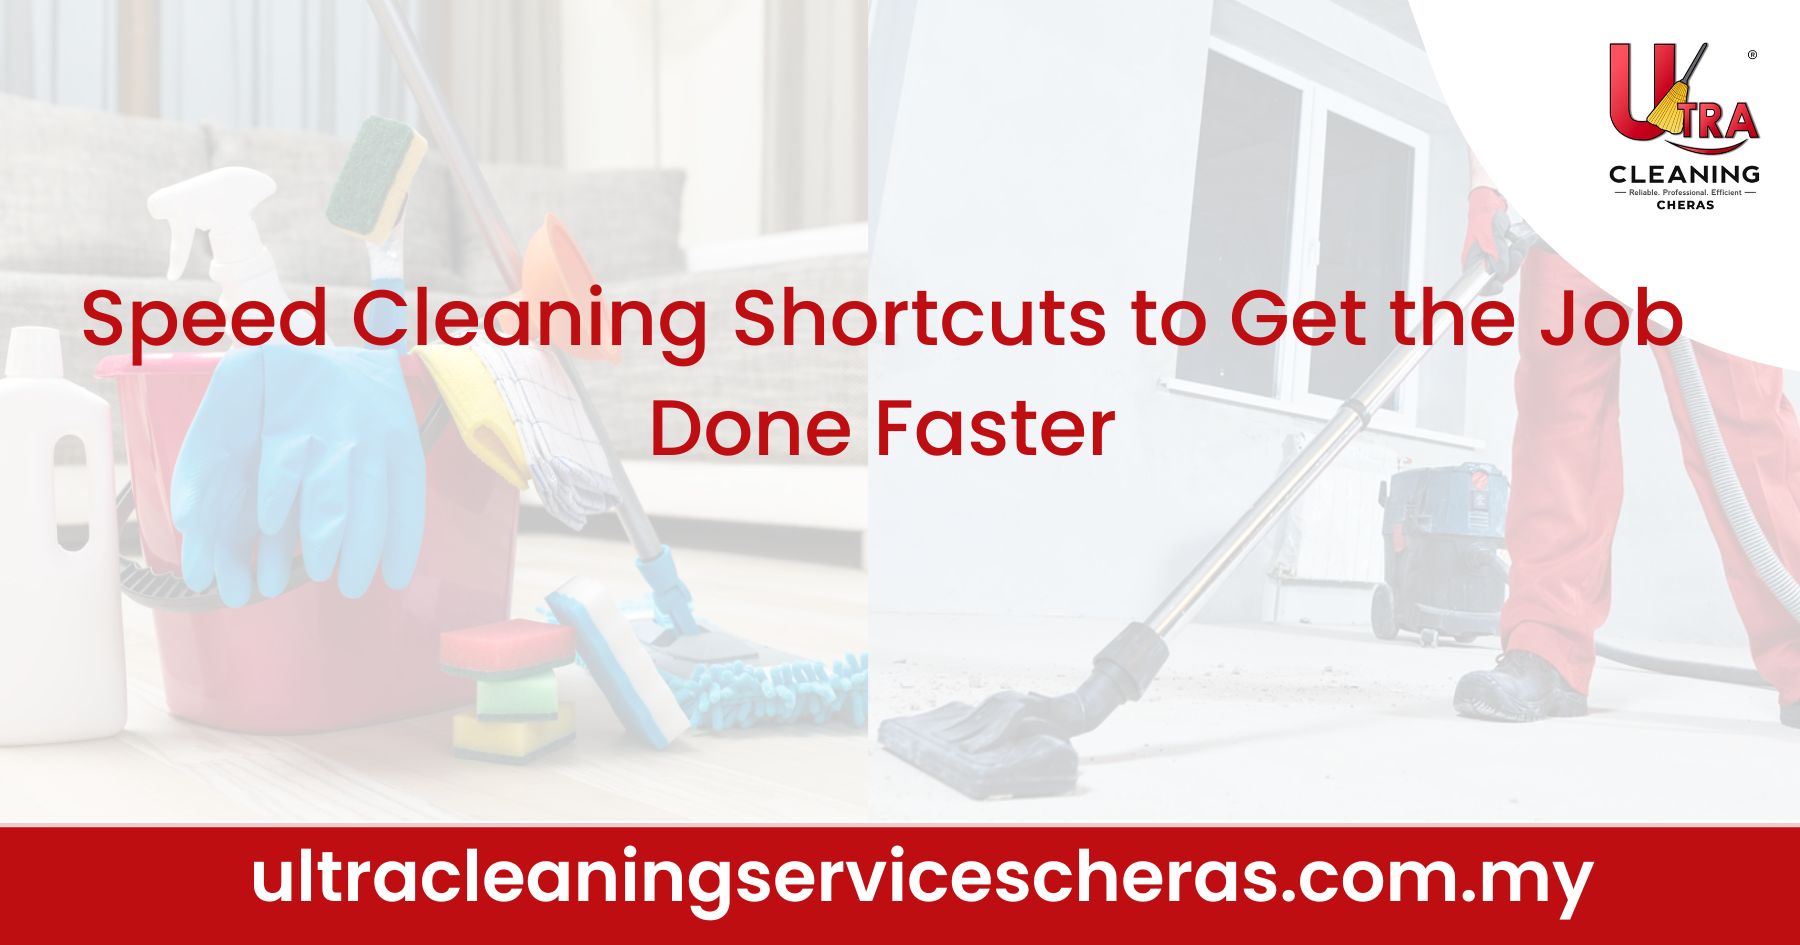 Speed Cleaning Shortcuts to Get the Job Done Faster